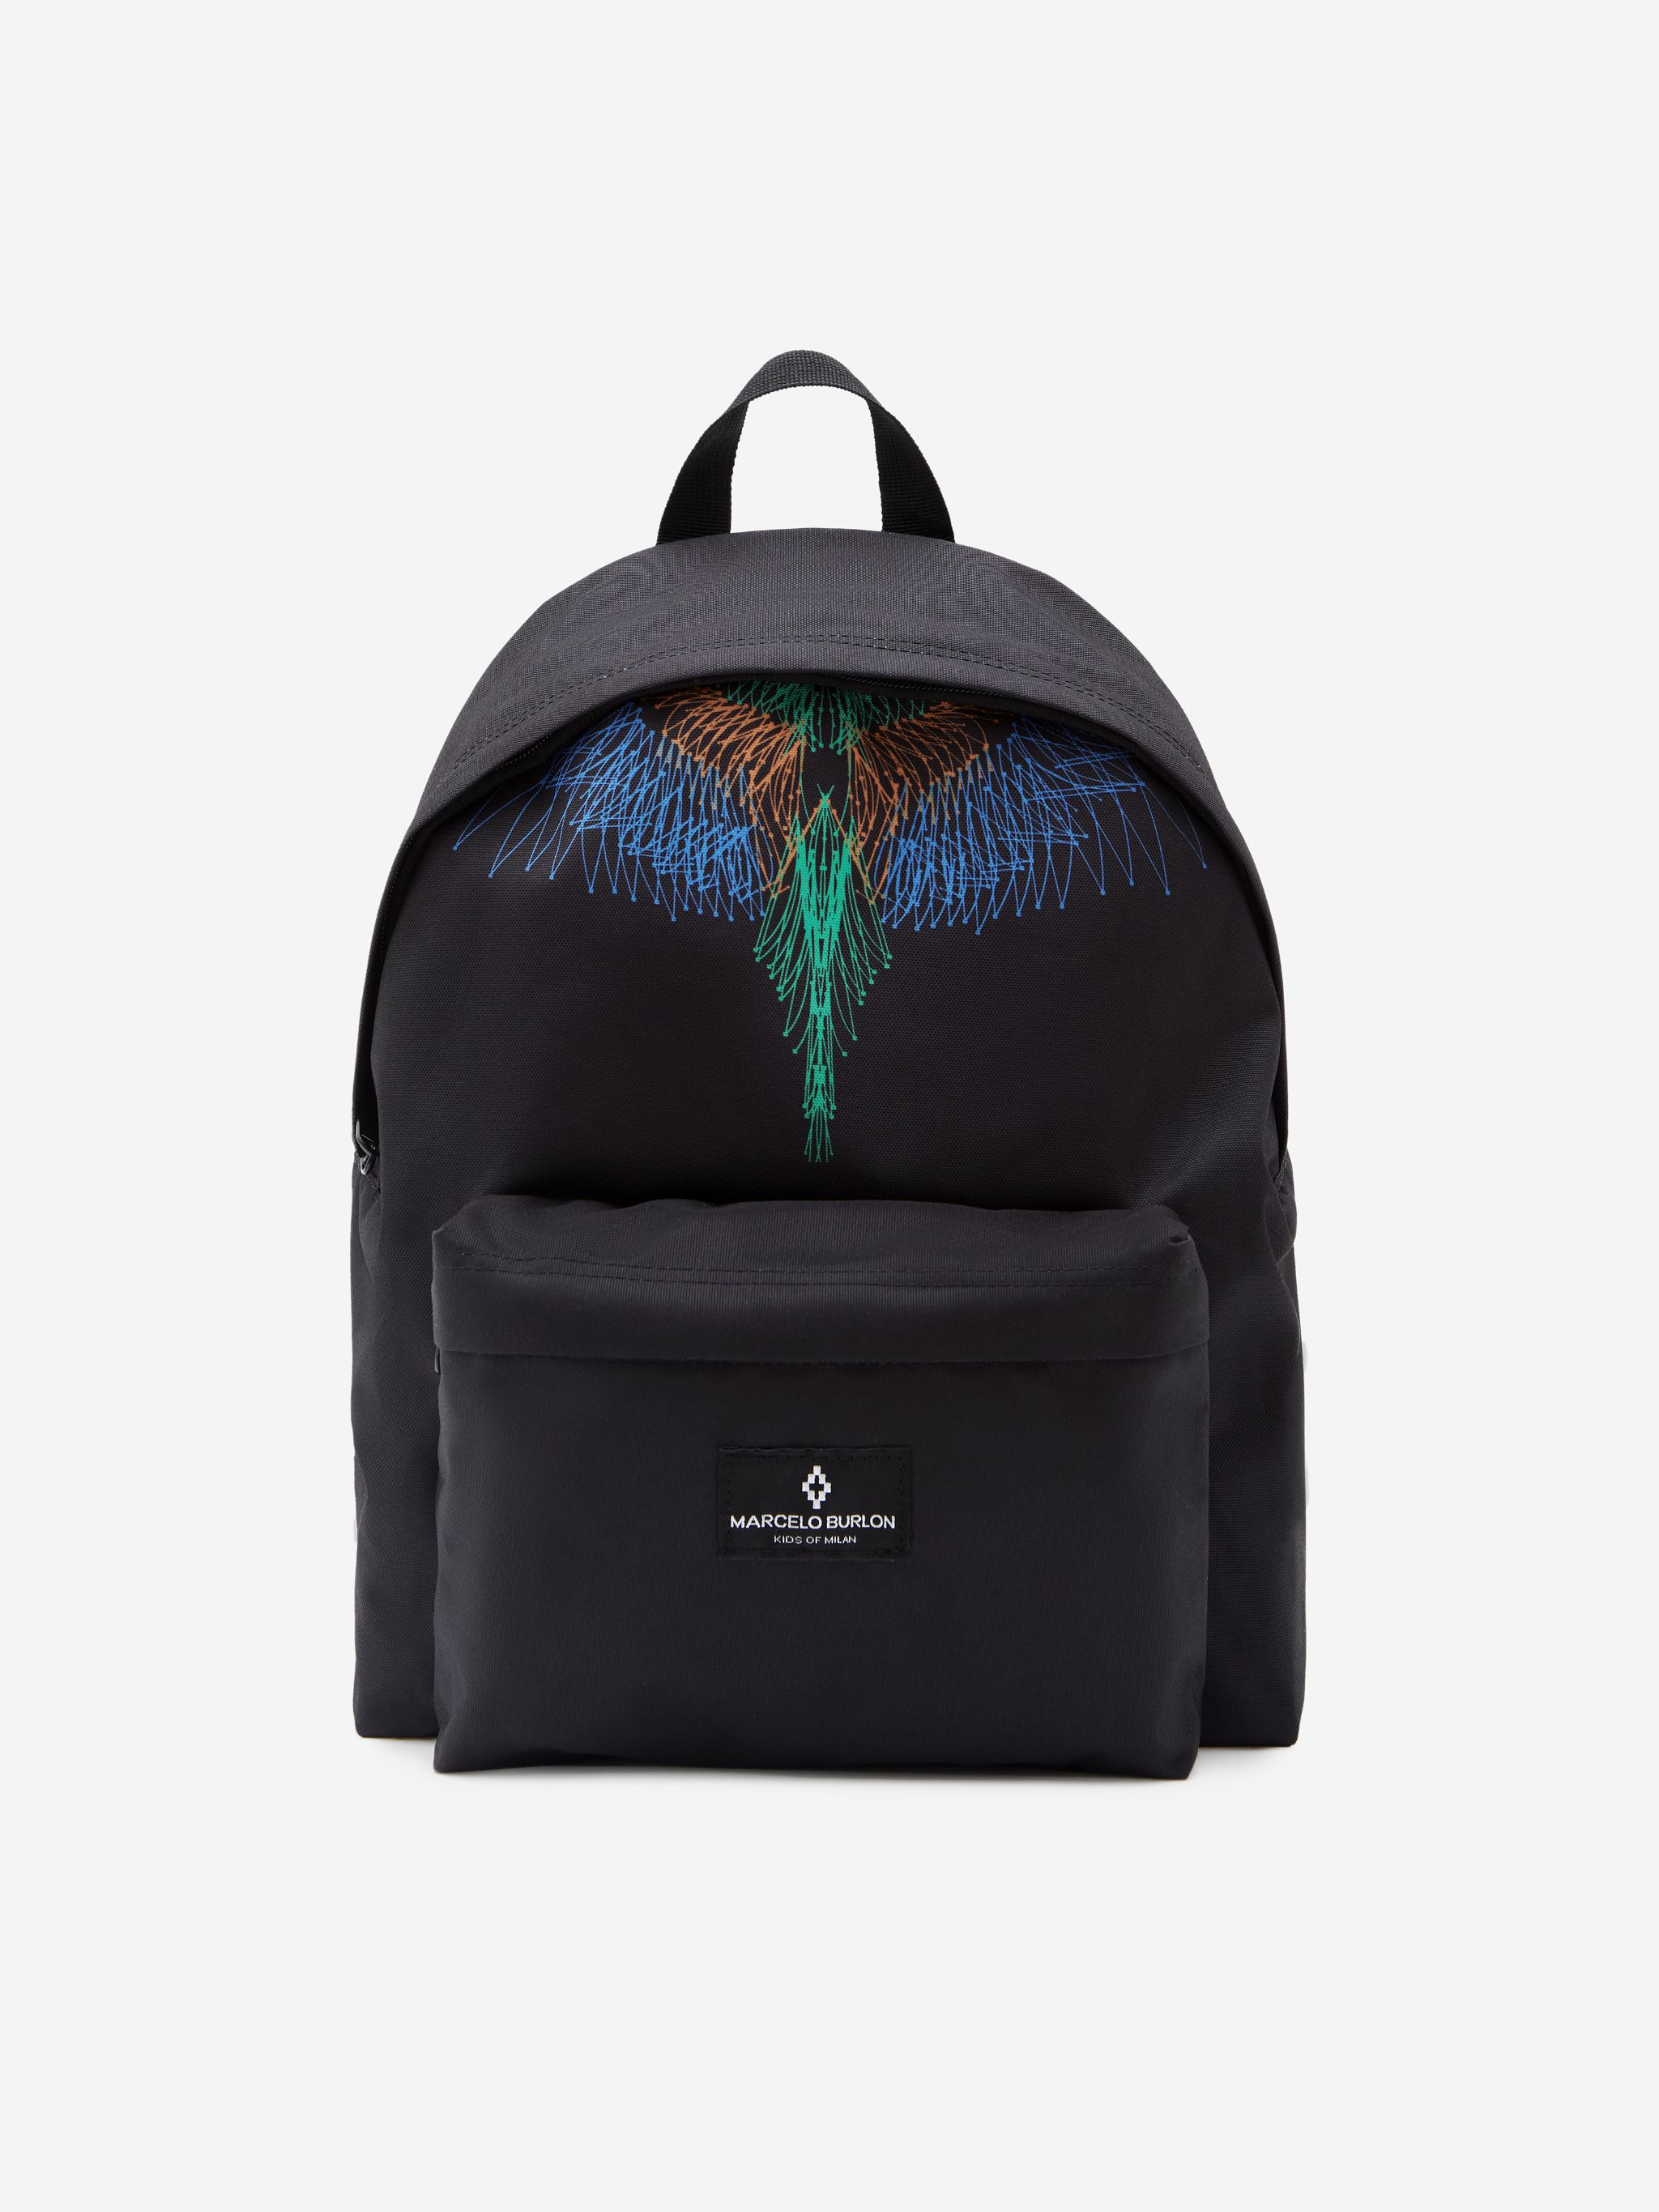 Black/multicolour Wings Graphic backpack from Marcelo Burlon Kids featuring signature Marcelo Burlon Wings print, logo patch to the front, main compartment, internal slip pocket, front zip-fastening compartment, two-way zip fastening, single rounded top handle and adjustable shoulder straps.